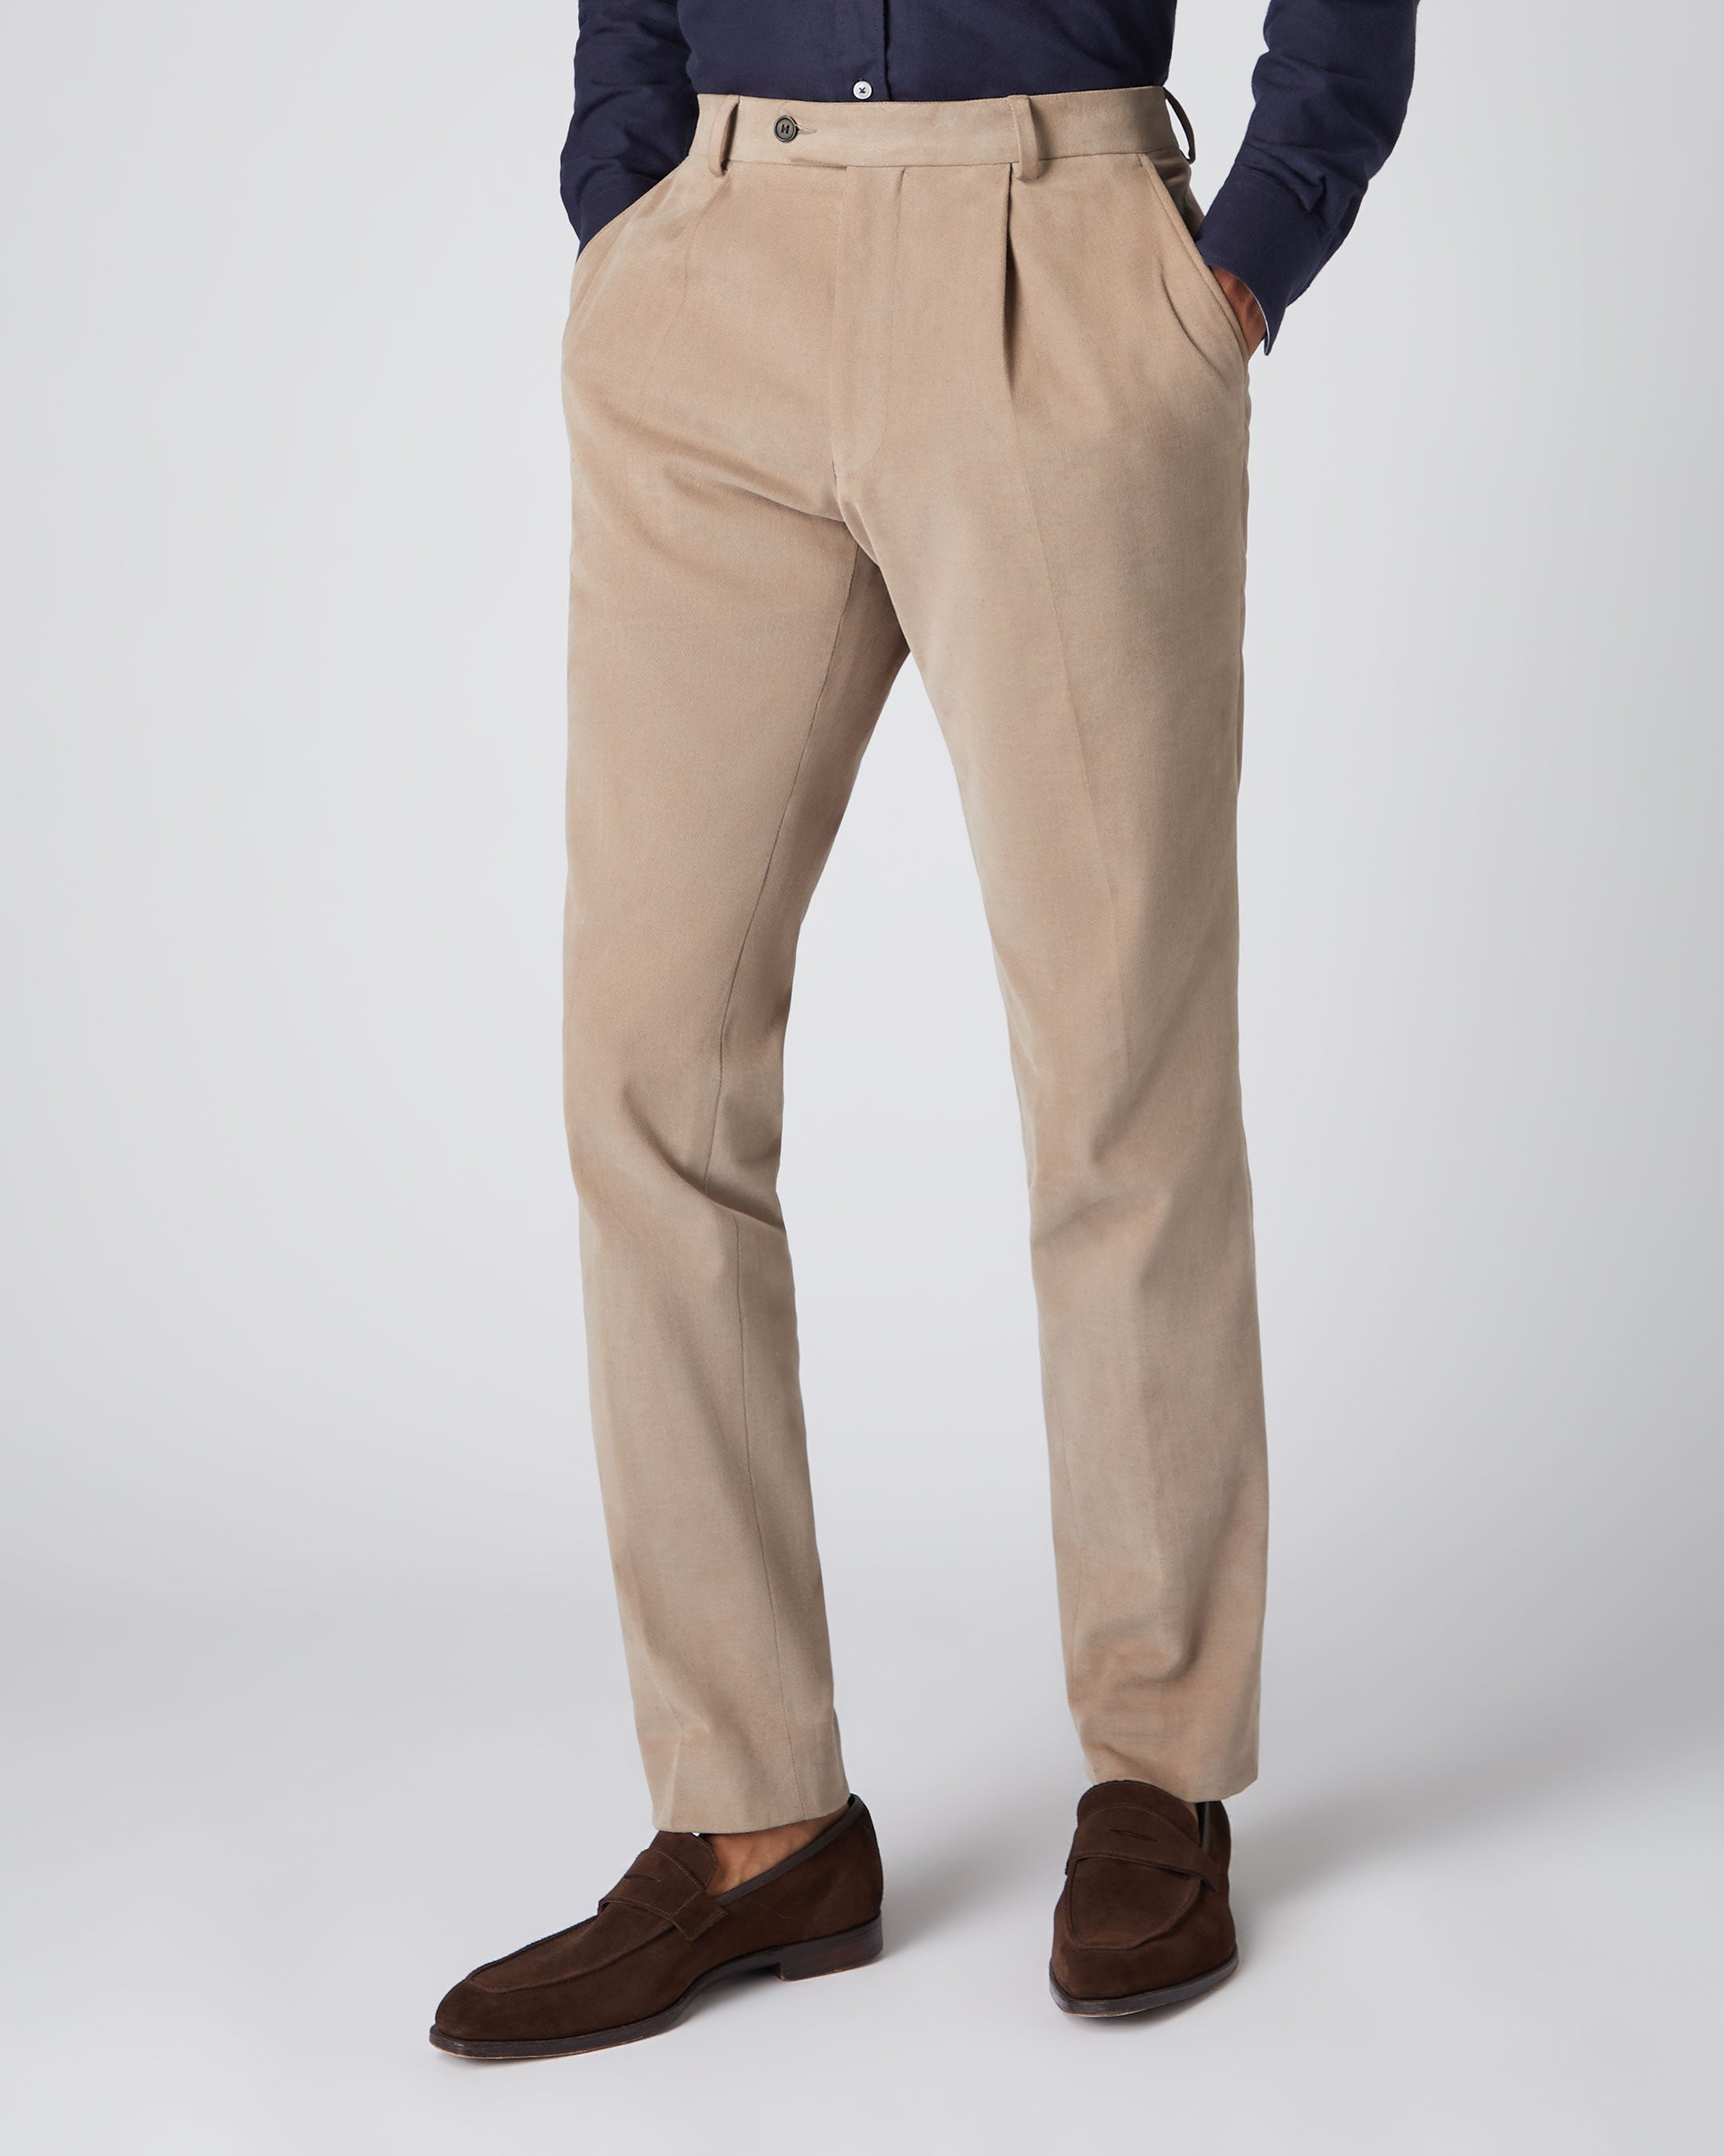 Trousers For Men - Buy Mens Trousers Pants Online - Myntra